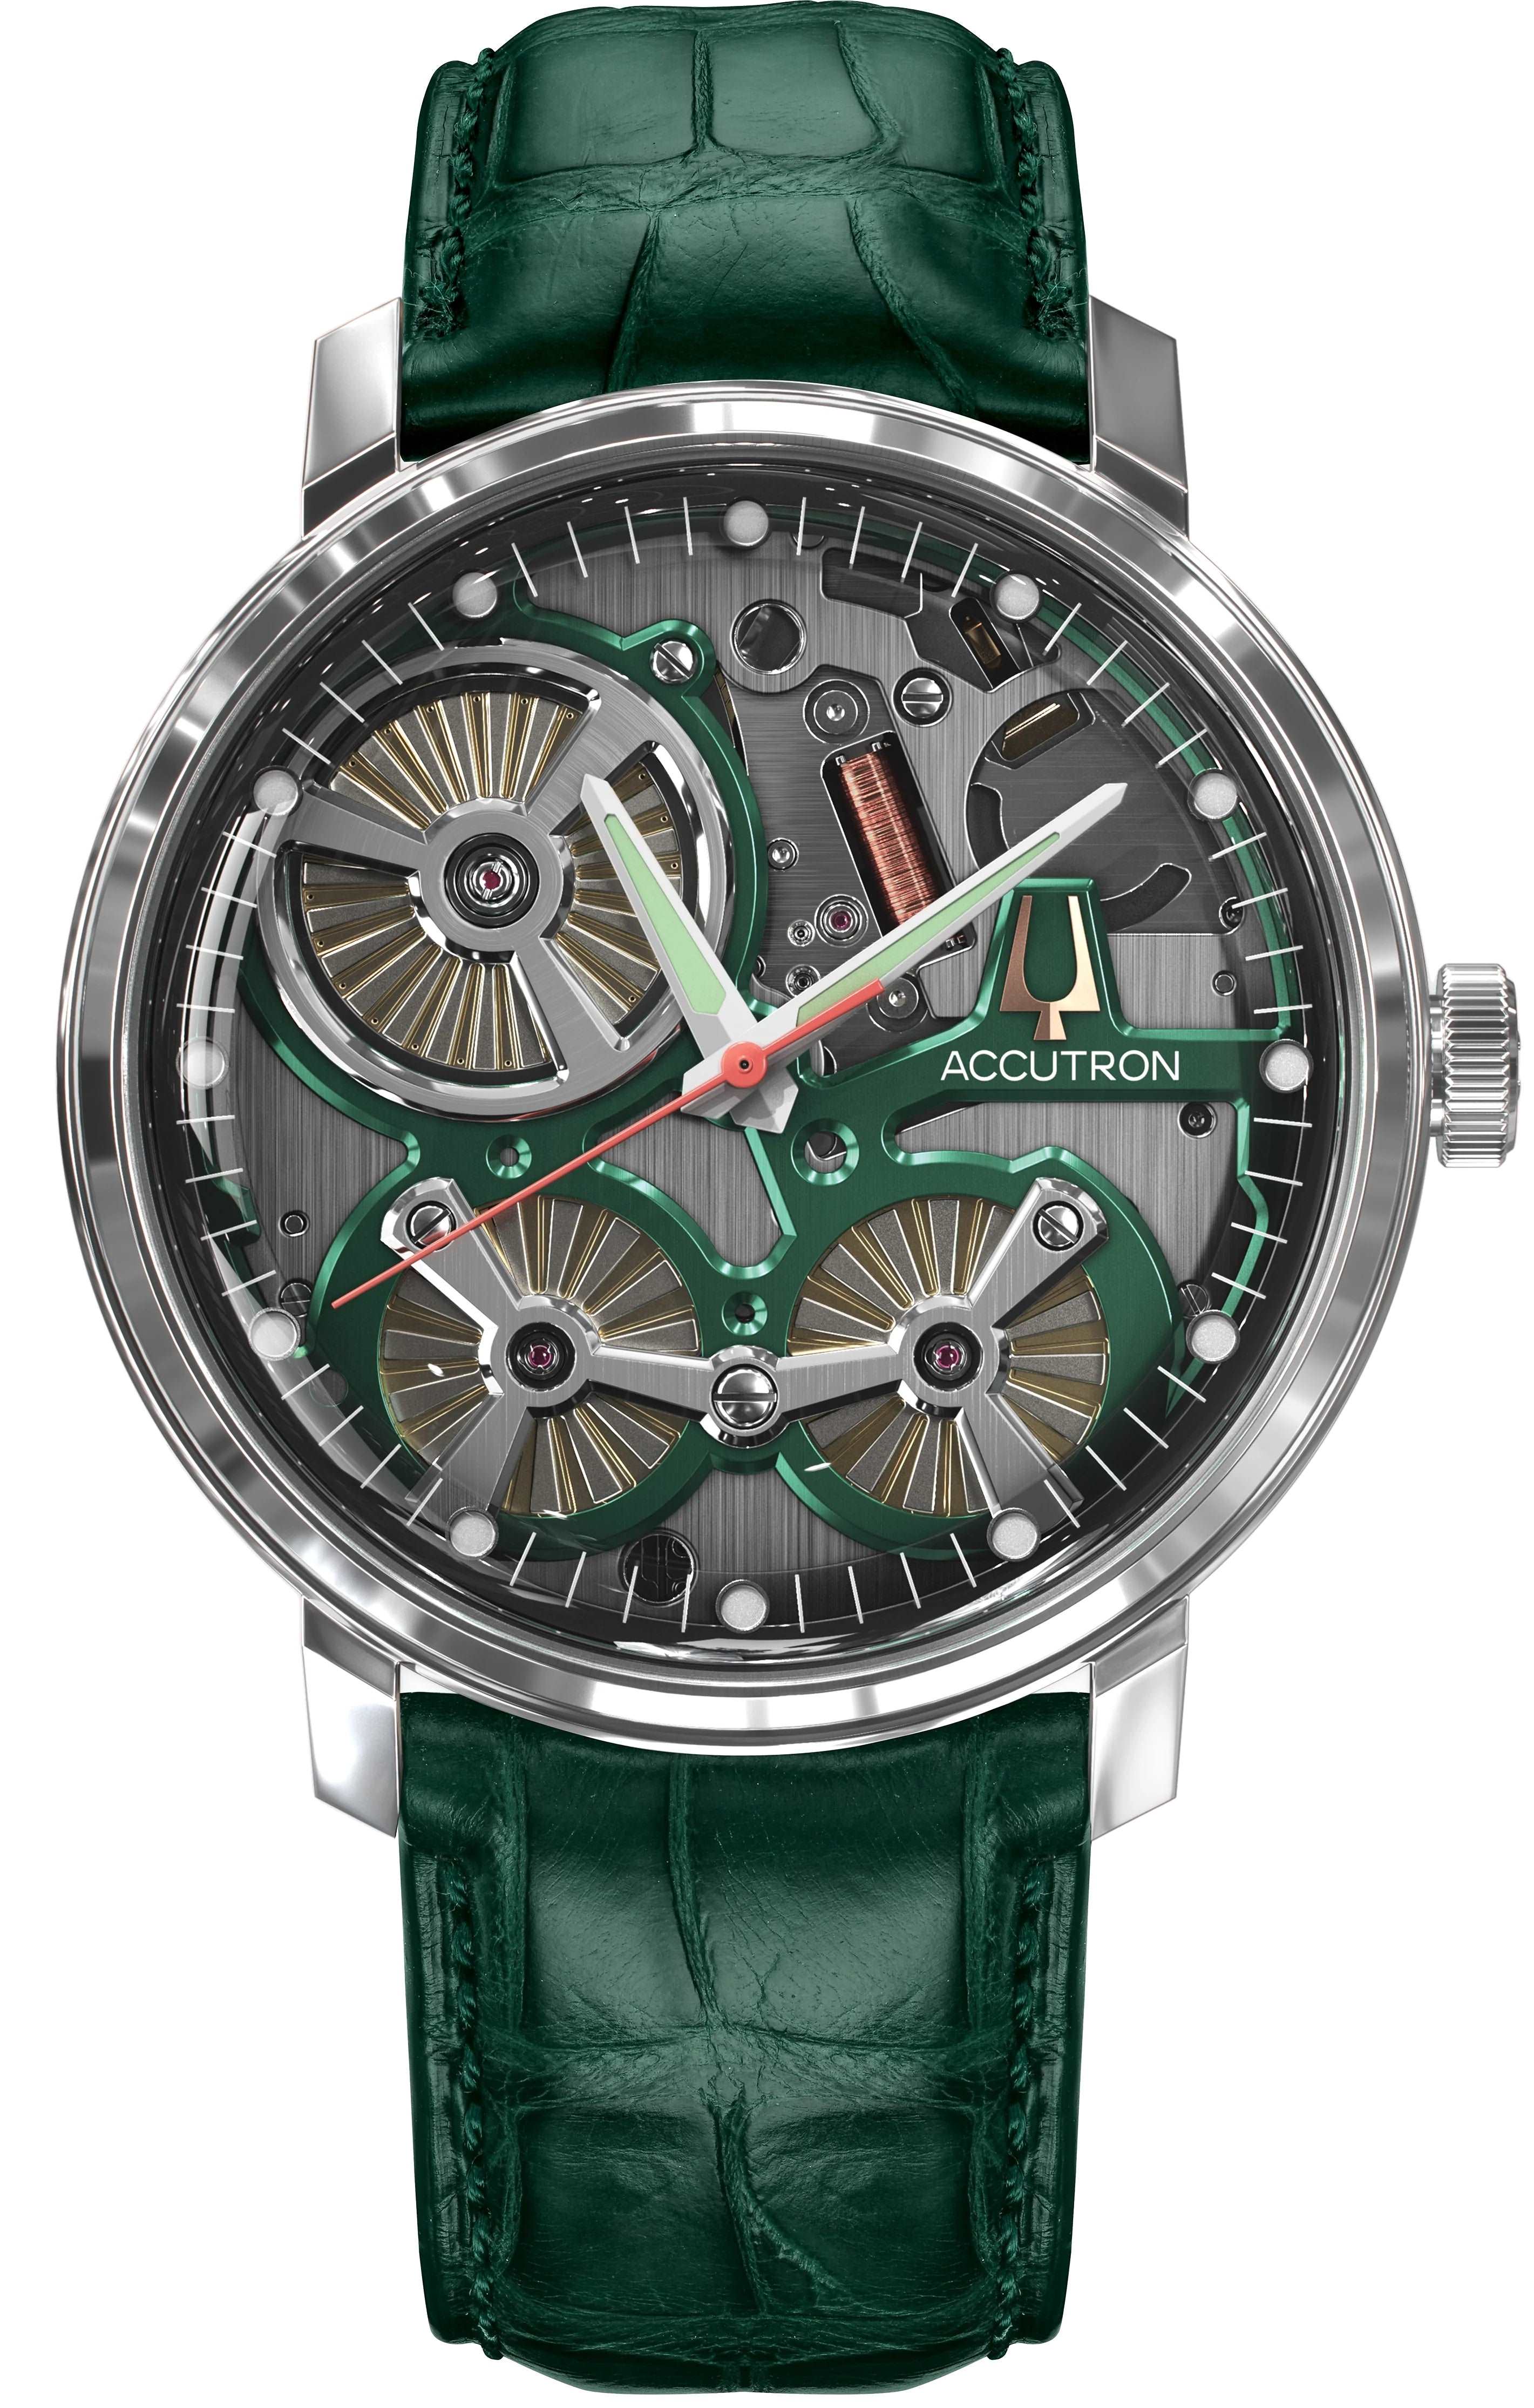 Accutron Spaceview 2020 Watch with Green Strap